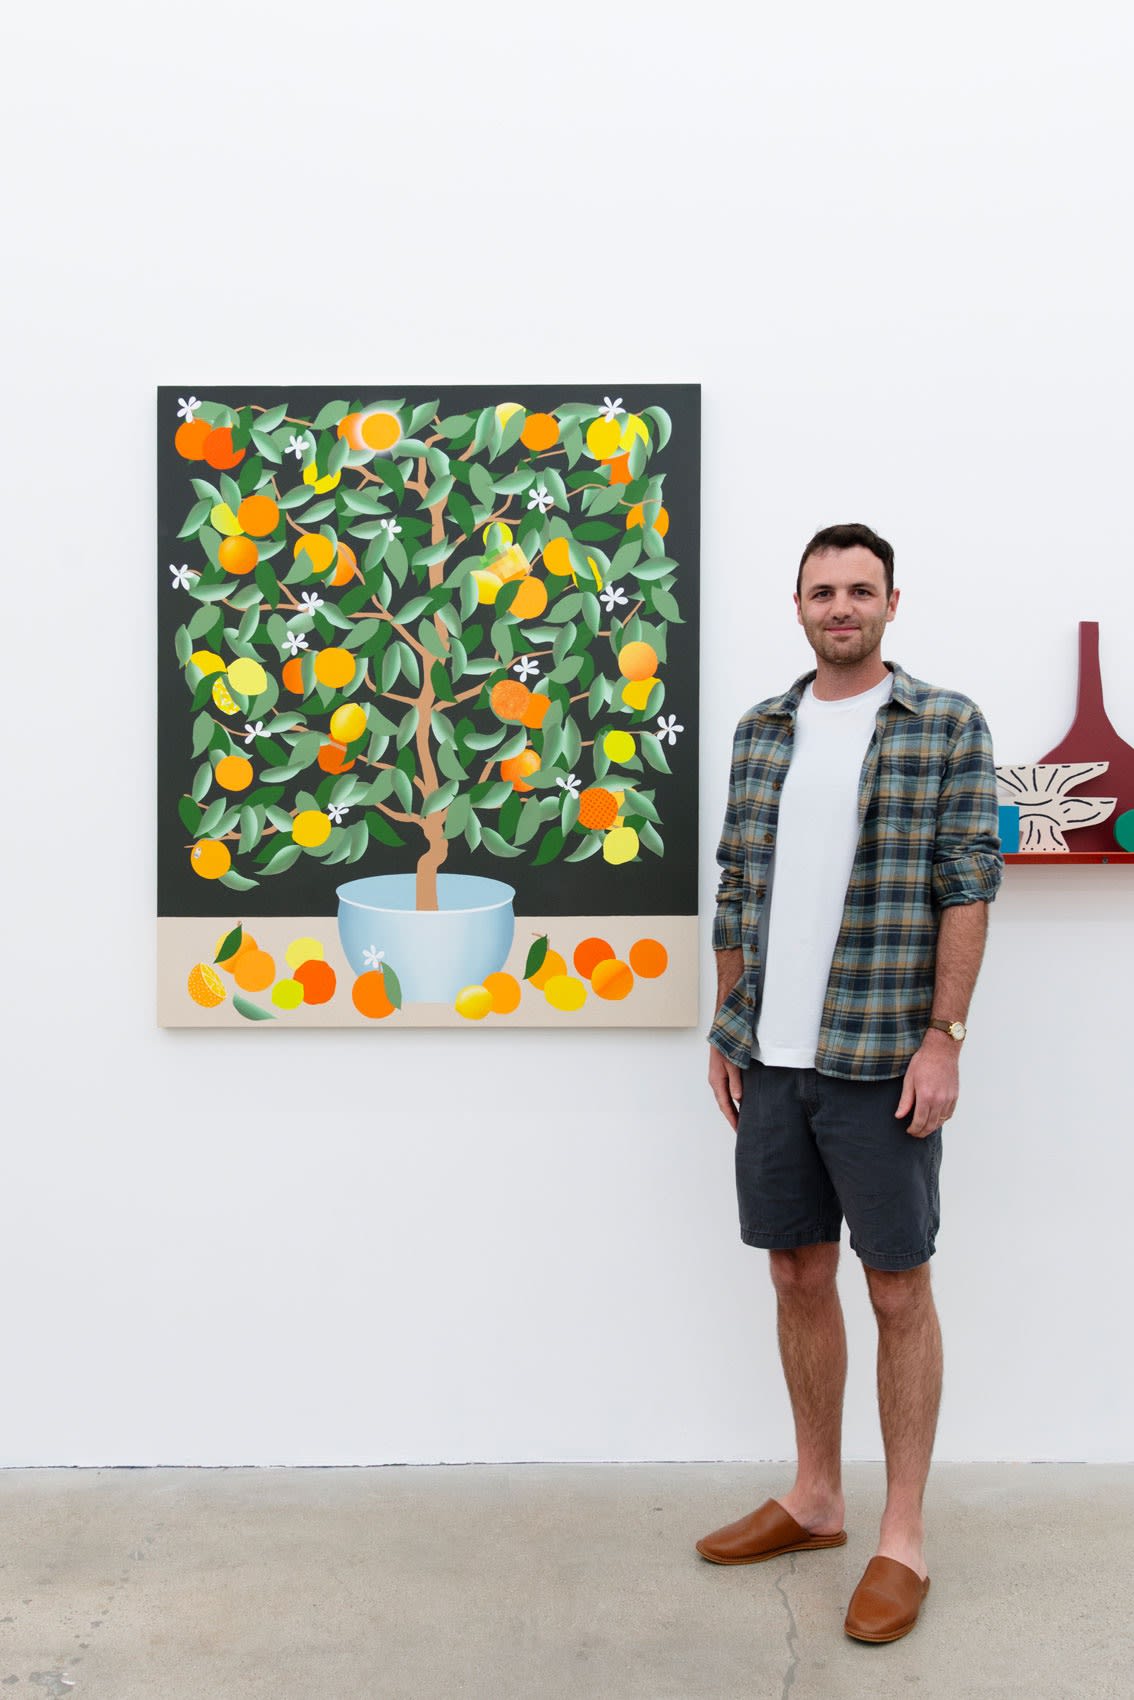 Artist Stephen D'Onofrio next to his painting at the opening reception of Pith at Hashimoto Contemporary Los Angeles.